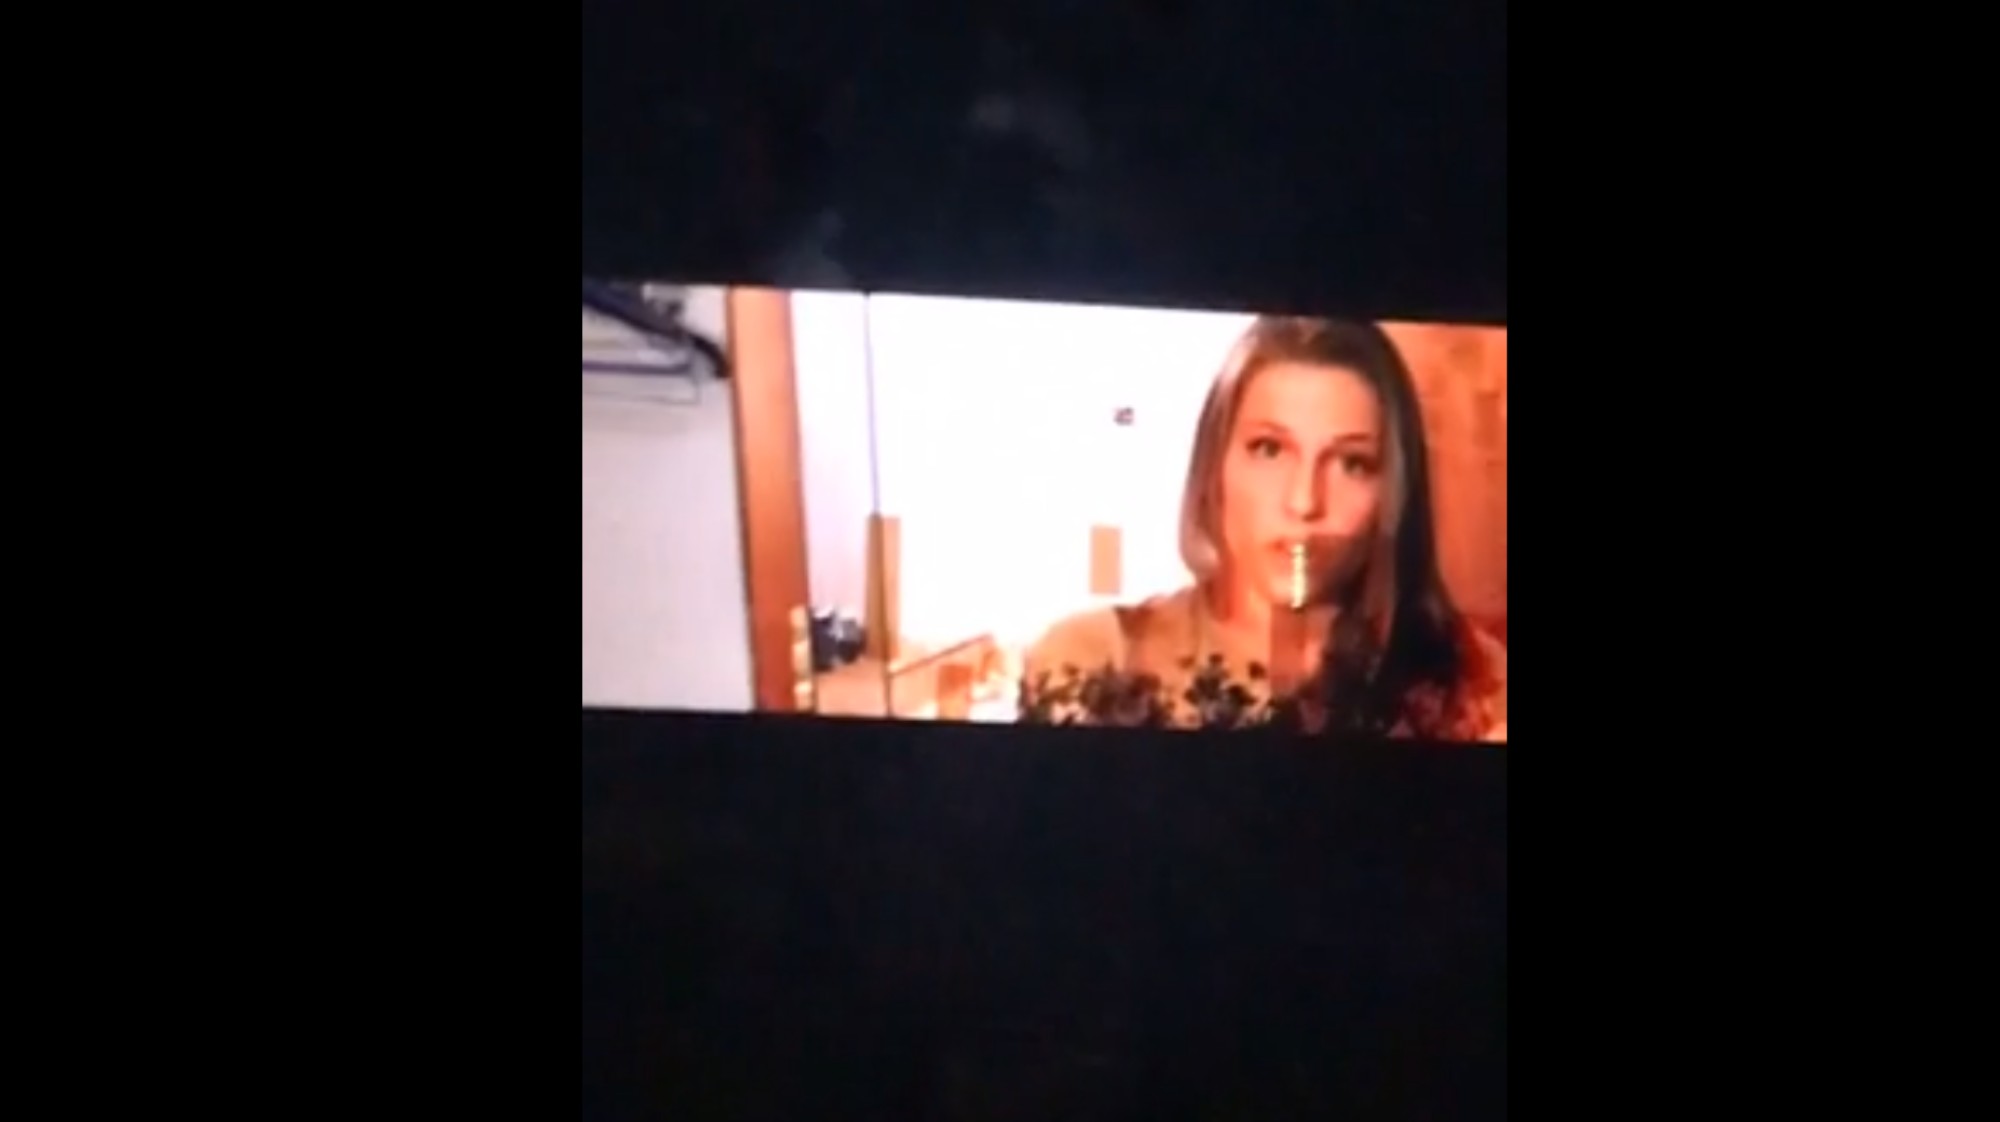 Complete Blowjob Porn - Threesome Blowjob Scene on Giant Highway Billboard Could ...